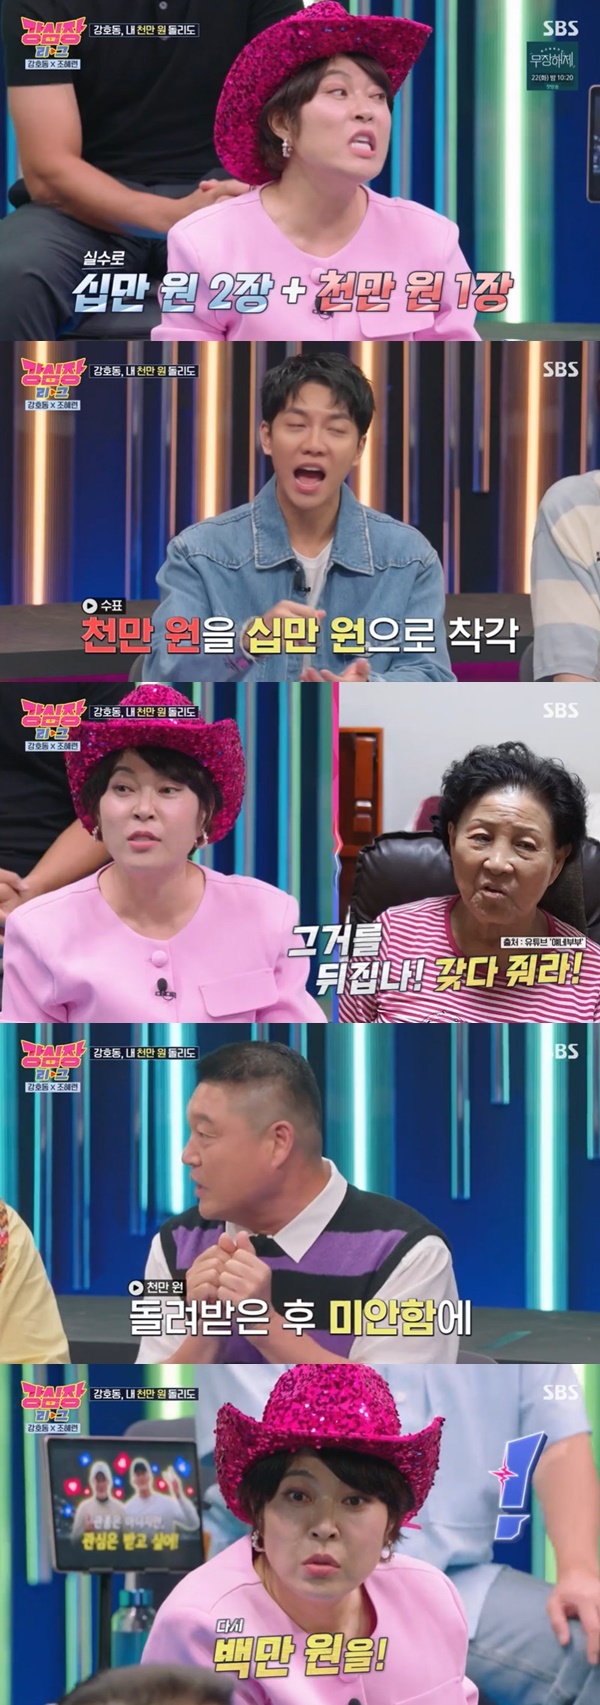 Johye-ryeon has confided in Kang Ho-dong about past money troubles.On August 15th, SBS Entertainment Strong Heart UEFA Champions League  ⁇  Joehye-ryeon told Kang Ho-dong and his past 12 years ago.On this day, Johye-ryeon said,  ⁇ Kang Ho-dong, my 10 million won Dolly Dot ⁇ , and Kim Ho-young,  ⁇   ⁇   ⁇   ⁇   ⁇   ⁇   ⁇   ⁇   ⁇   ⁇   ⁇   ⁇   ⁇   ⁇   ⁇   ⁇   ⁇   ⁇   ⁇   ⁇   ⁇   ⁇   ⁇   ⁇   ⁇   ⁇   ⁇   ⁇ .JOHYE-RYEON  ⁇ Strong Heart  ⁇ UEFA Champions League  ⁇  Many people avoid Ji Suk-jin.I told him to think well, so I made an excuse when he came in.Johye-ryeon then said, Ive done this story once or twice on the air. Ive never done it properly in front of Kang Ho-dong.In fact, this story can be sarcastic if it is private, so I made it public by broadcasting.Johye-ryeon was  ⁇ 12 years ago. It was my mothers Septuagesima device. Kim Hak-rae came late with MC Ho-dong! I gave Envelope and left it to my brother-in-law. My brother-in-law went nuts.Ho-dong! What kind of person are you to me? You thought of me as a real friend.But when I opened Envelope, there was 10.2 million won in ambiguity. Joehye-ryeon is not  ⁇ 3.3%. What happened? My mother is Ho-dong! Shes a different kid.I got a phone call from Kang Ho-dong. Im sorry, but I made a mistake of 100,000 won.Johye-ryeon is Ho-dong! I tried to put 300,000 won, but I put one sheet wrong. I was 300,000 won.Kang Ho-dong said that when he returned 10 million won to Kang Ho-dong, his mother said that he turned over when he wrestled.